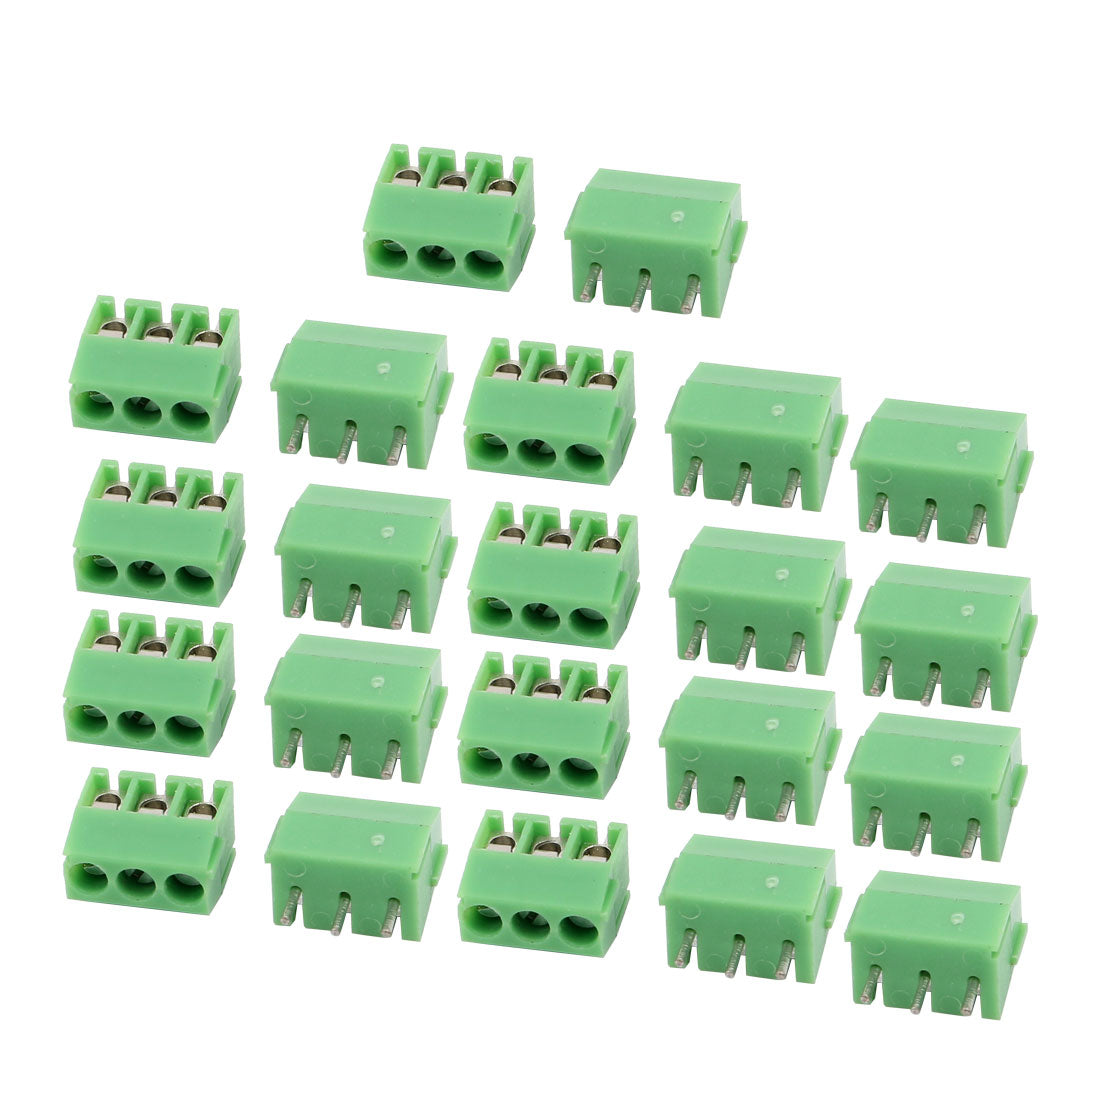 uxcell Uxcell 22Pcs AC 300V 10A 3.5mm Pitch 3P Terminal Block PCB Mount Wire Connection